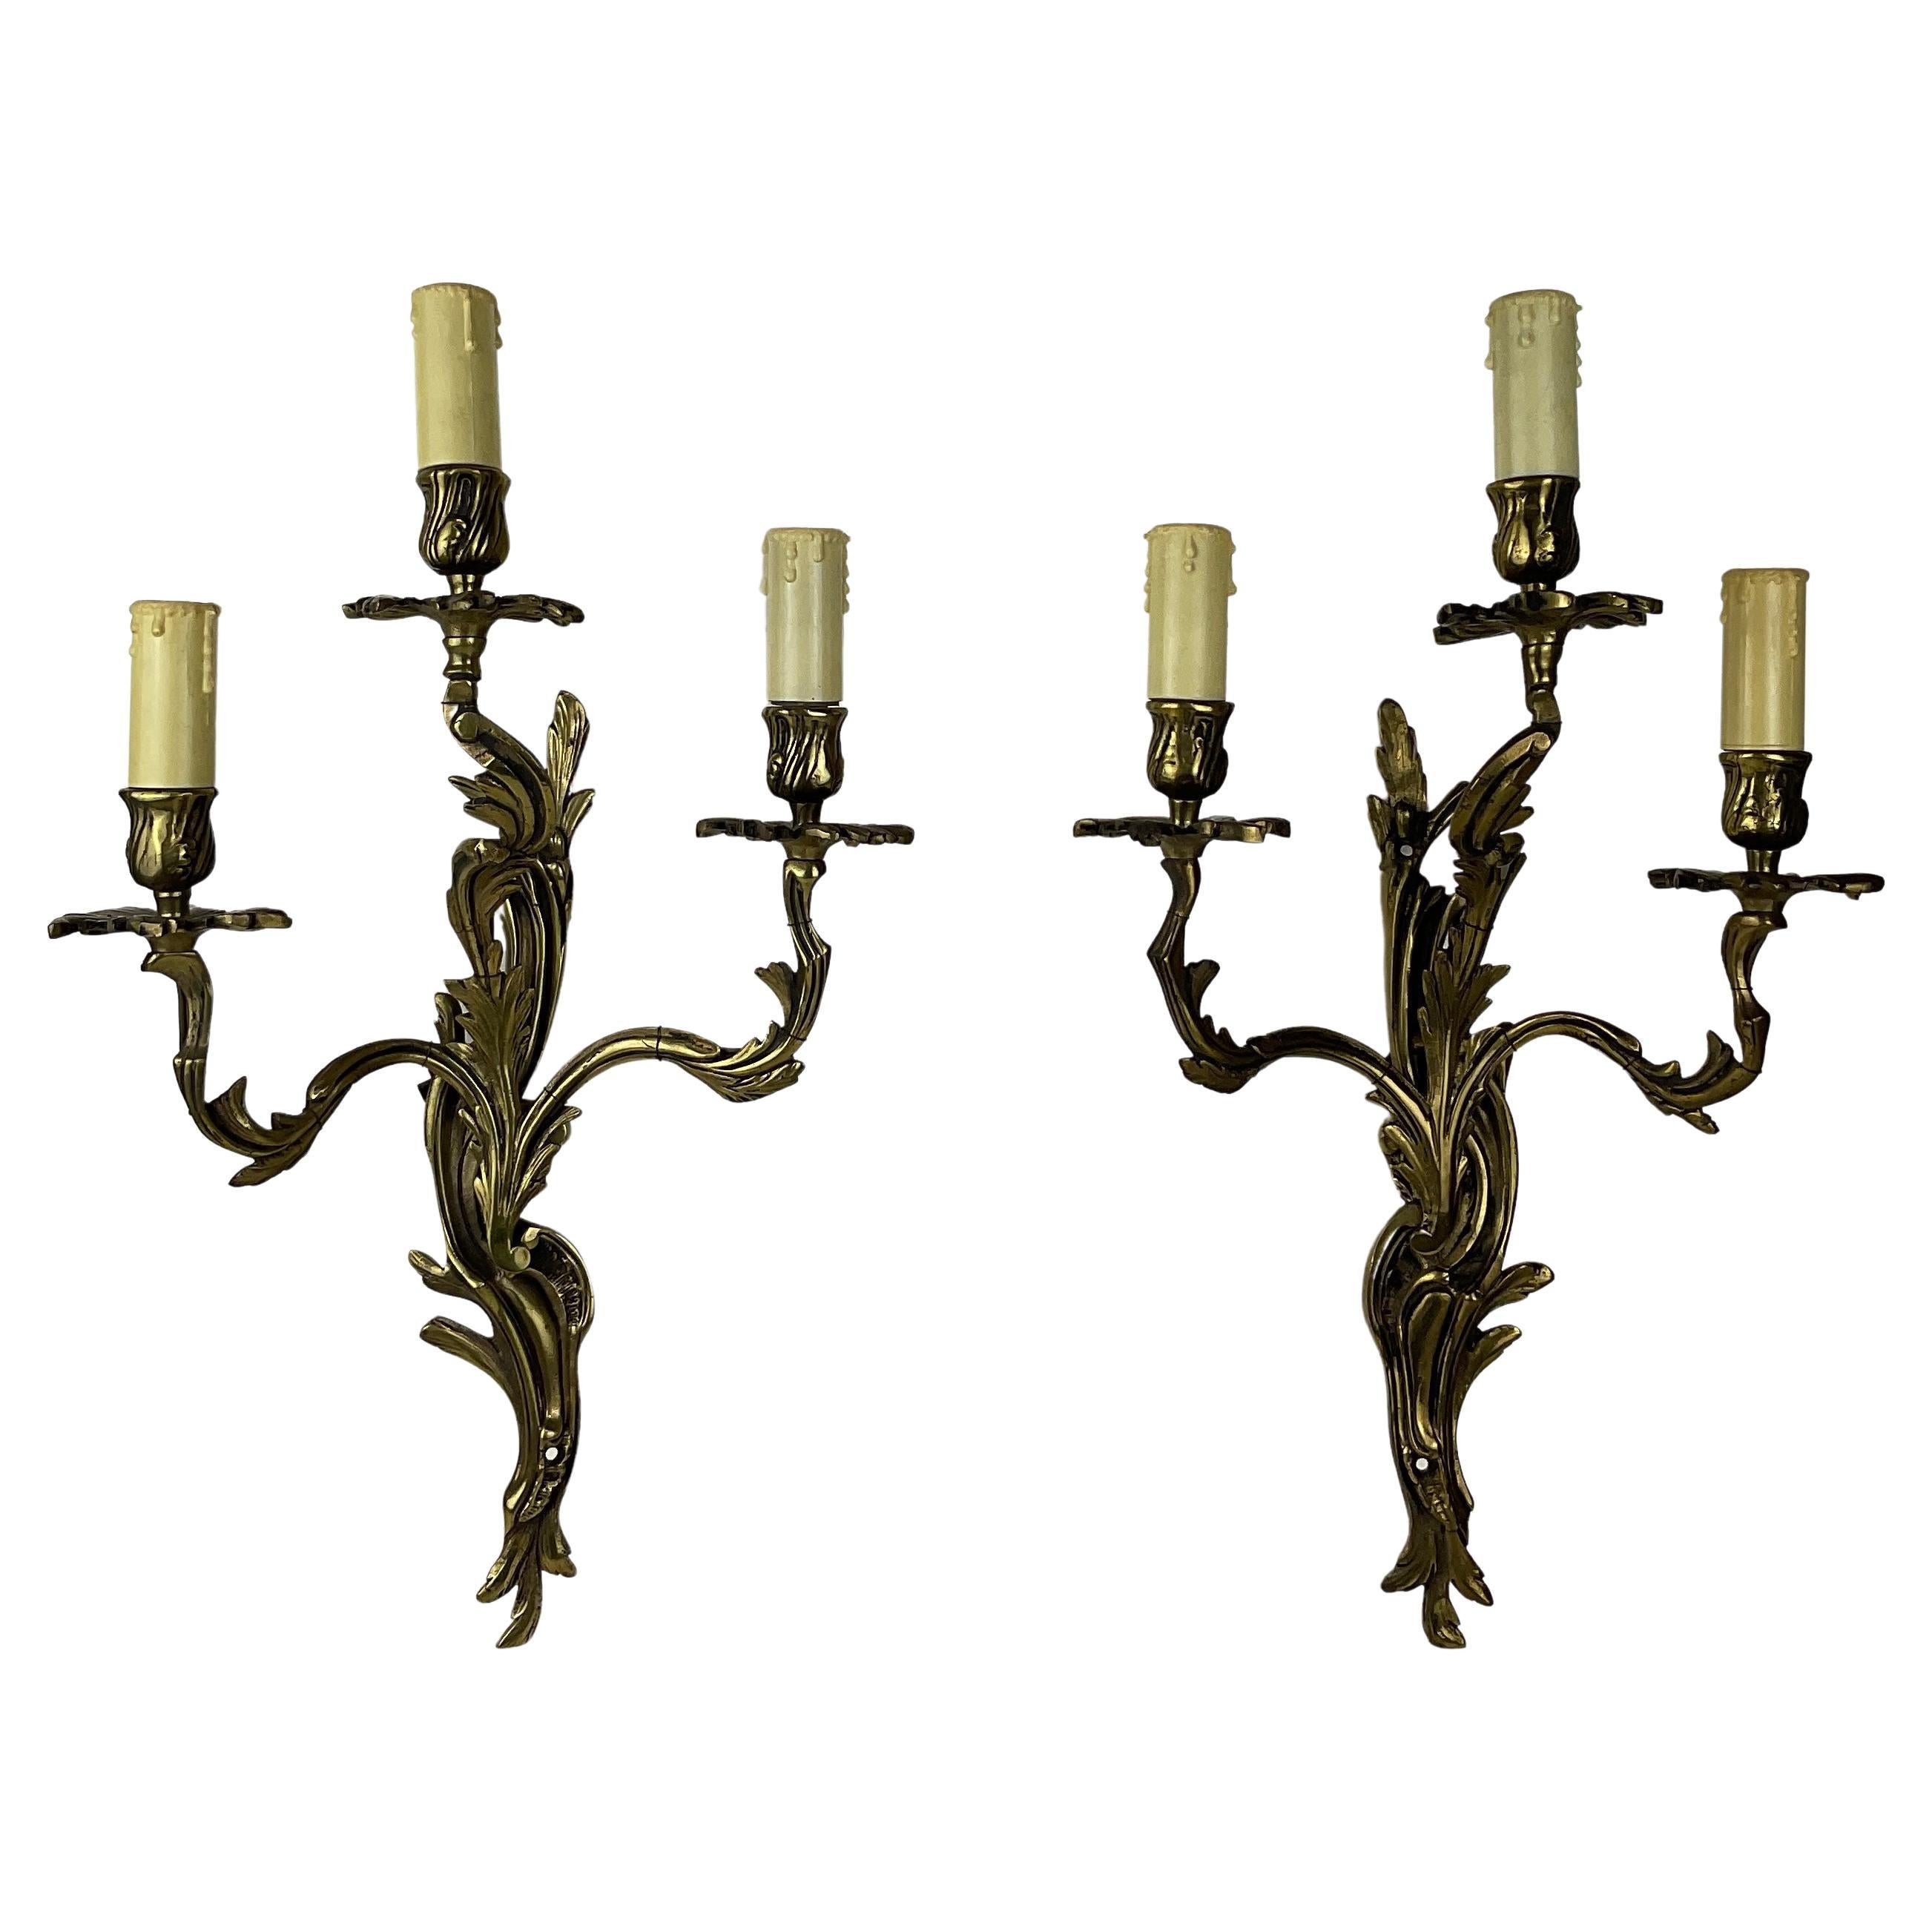 Pair of French Louis XV Style Gilt Bronze Three-Armed Sconces For Sale